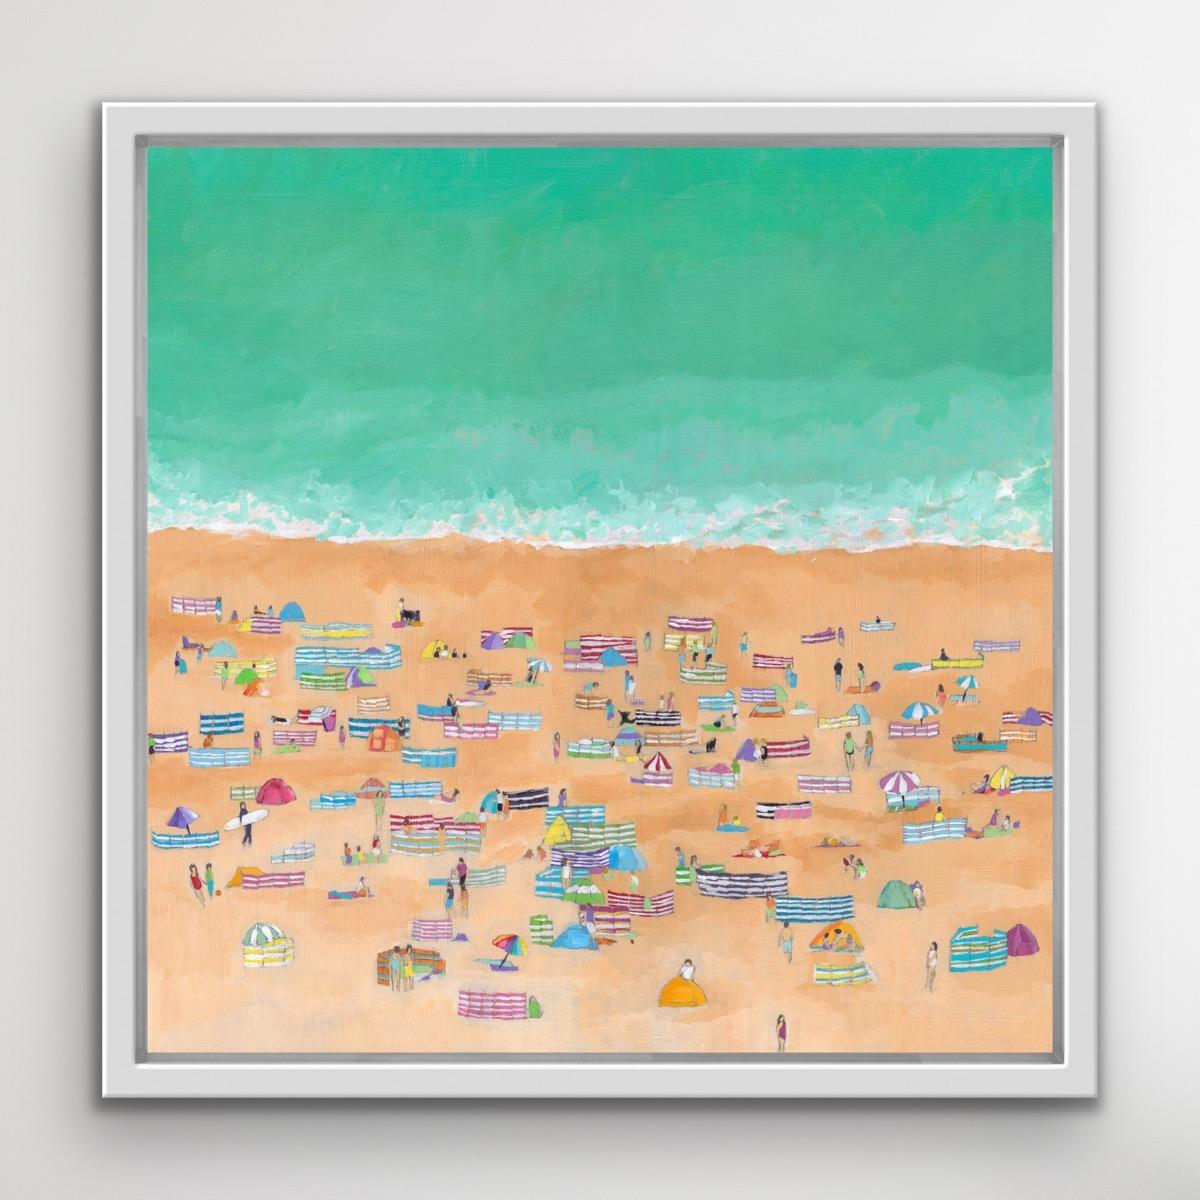 This piece was inspired by outings to the artist's local beach in August, when the sand is filled with people enjoying the Cornish sunshine! The turquoise ocean reflects the calm of rippling waves against the joyful colours of the windbreaks.
Lenny